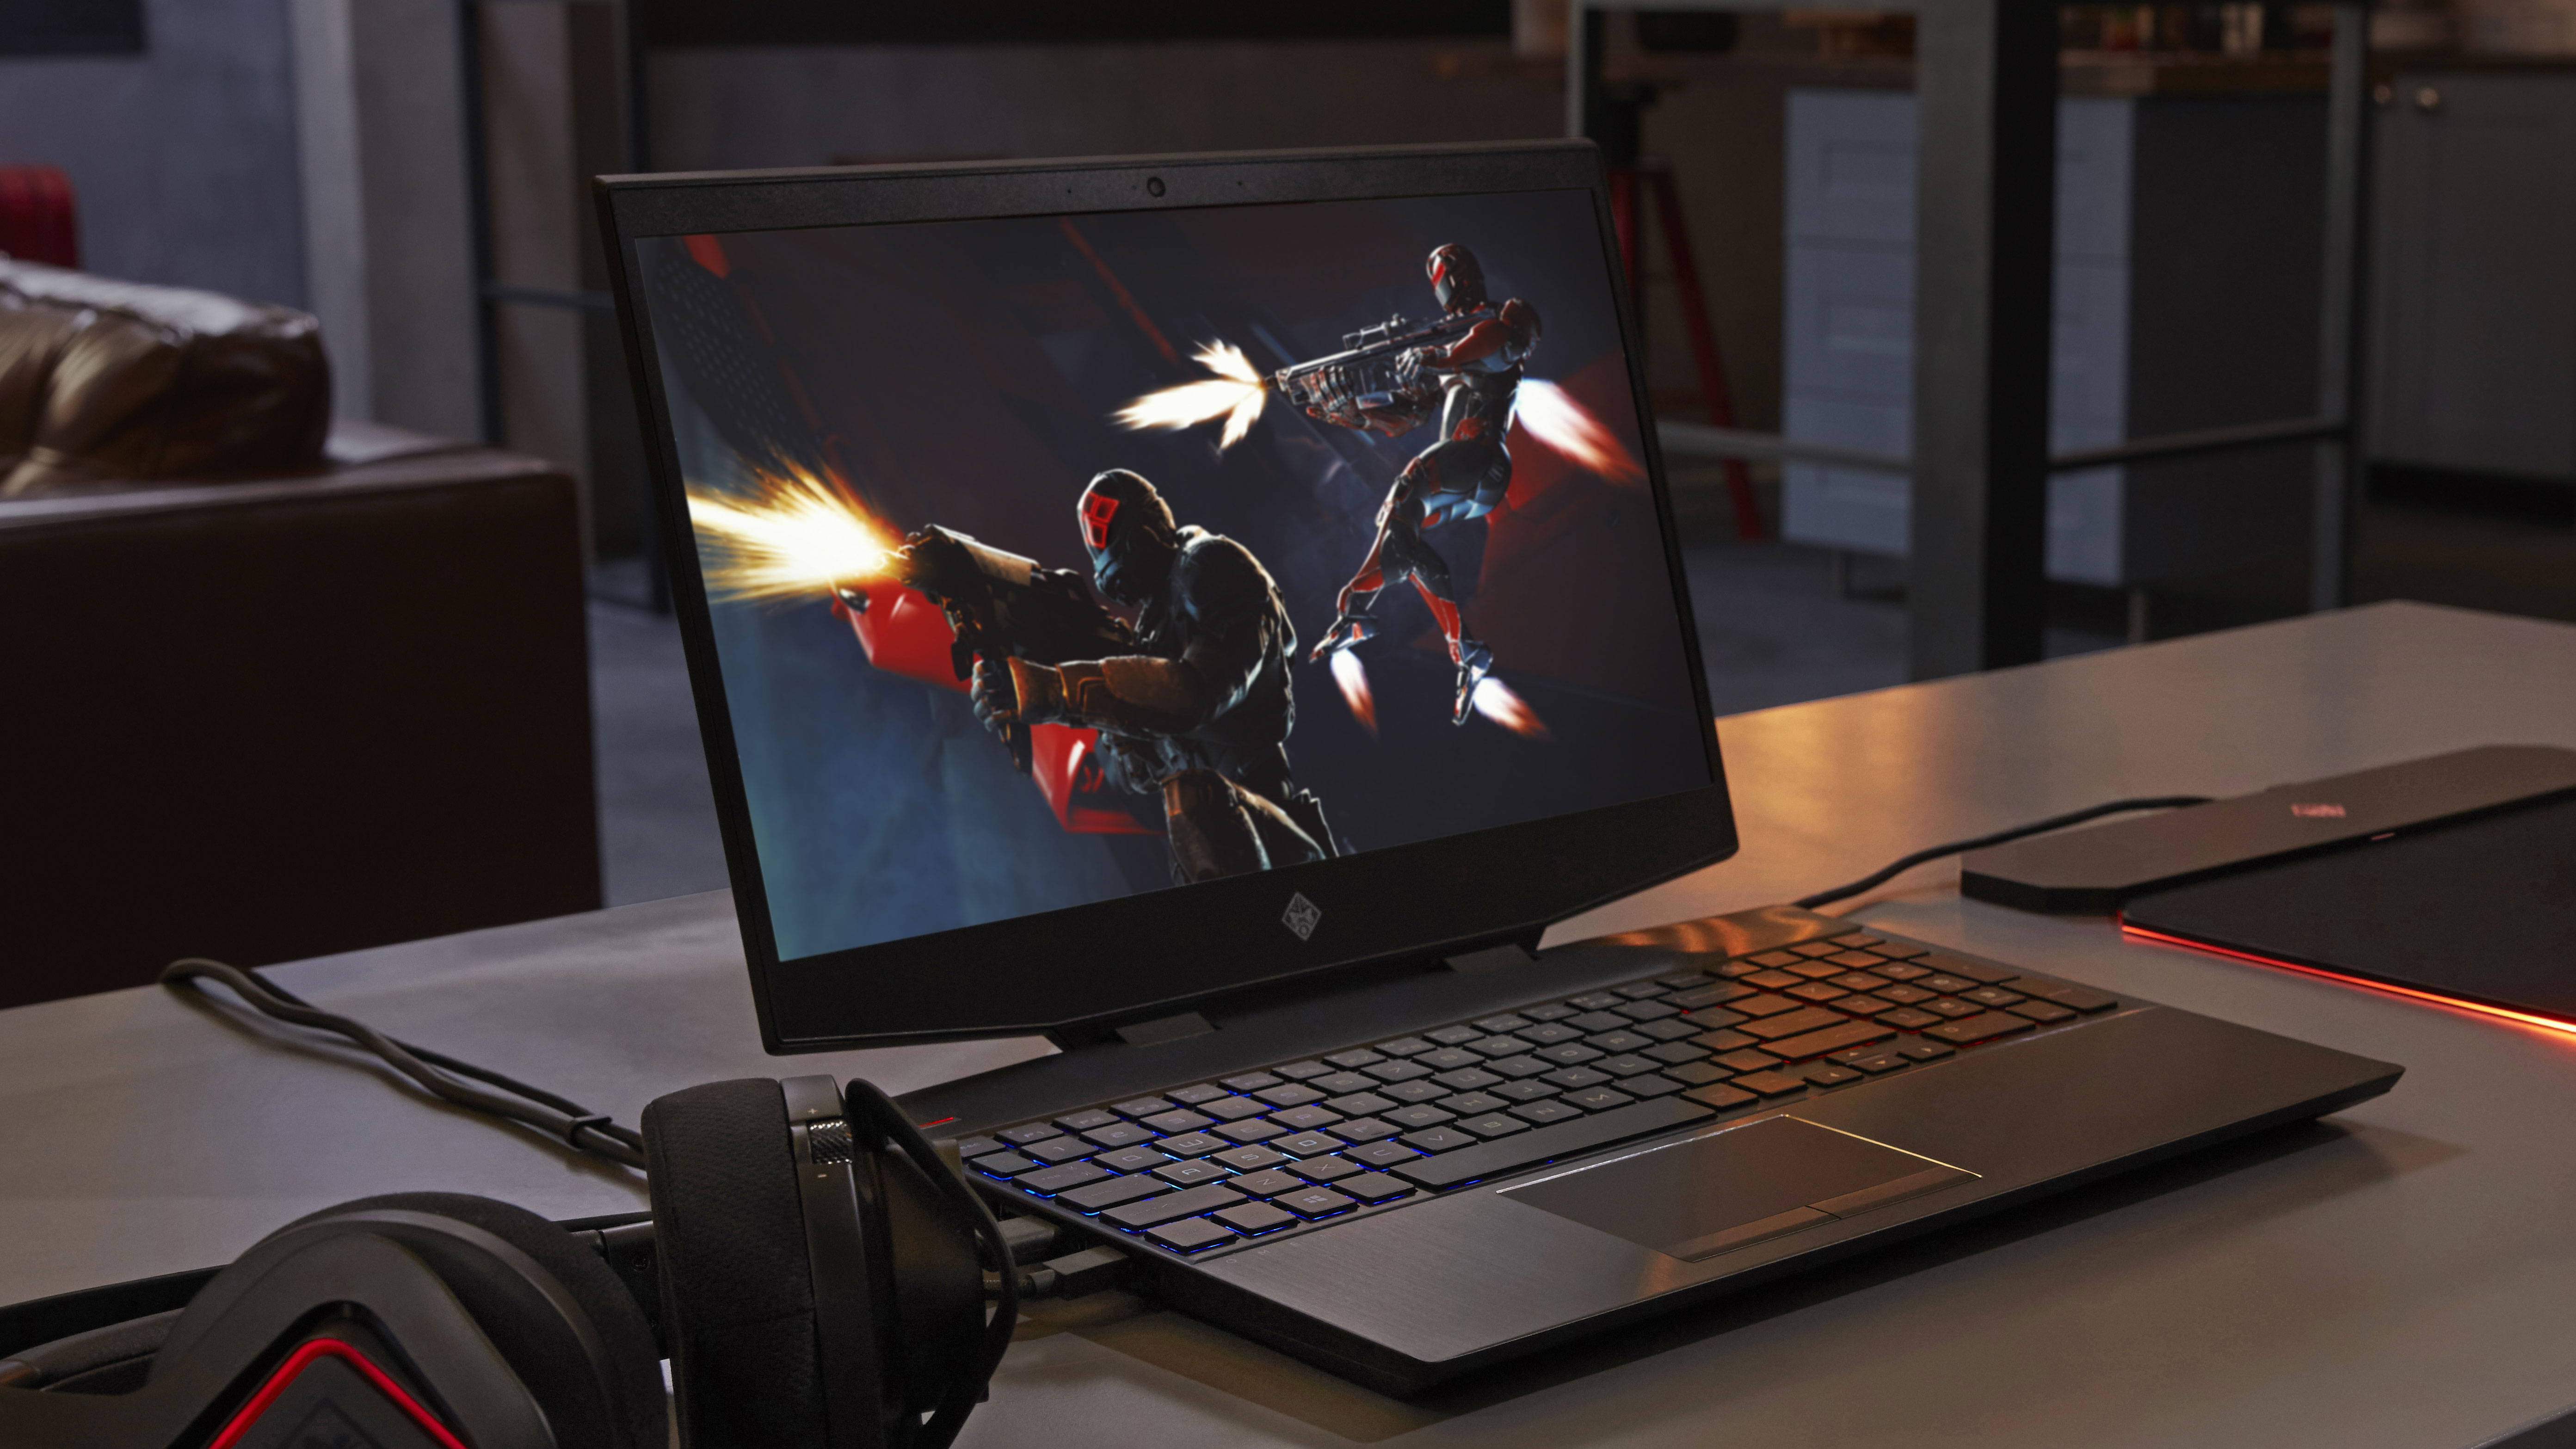 The HP Omen 15 may be the next flagship gaming laptop to go AMD Ryzen